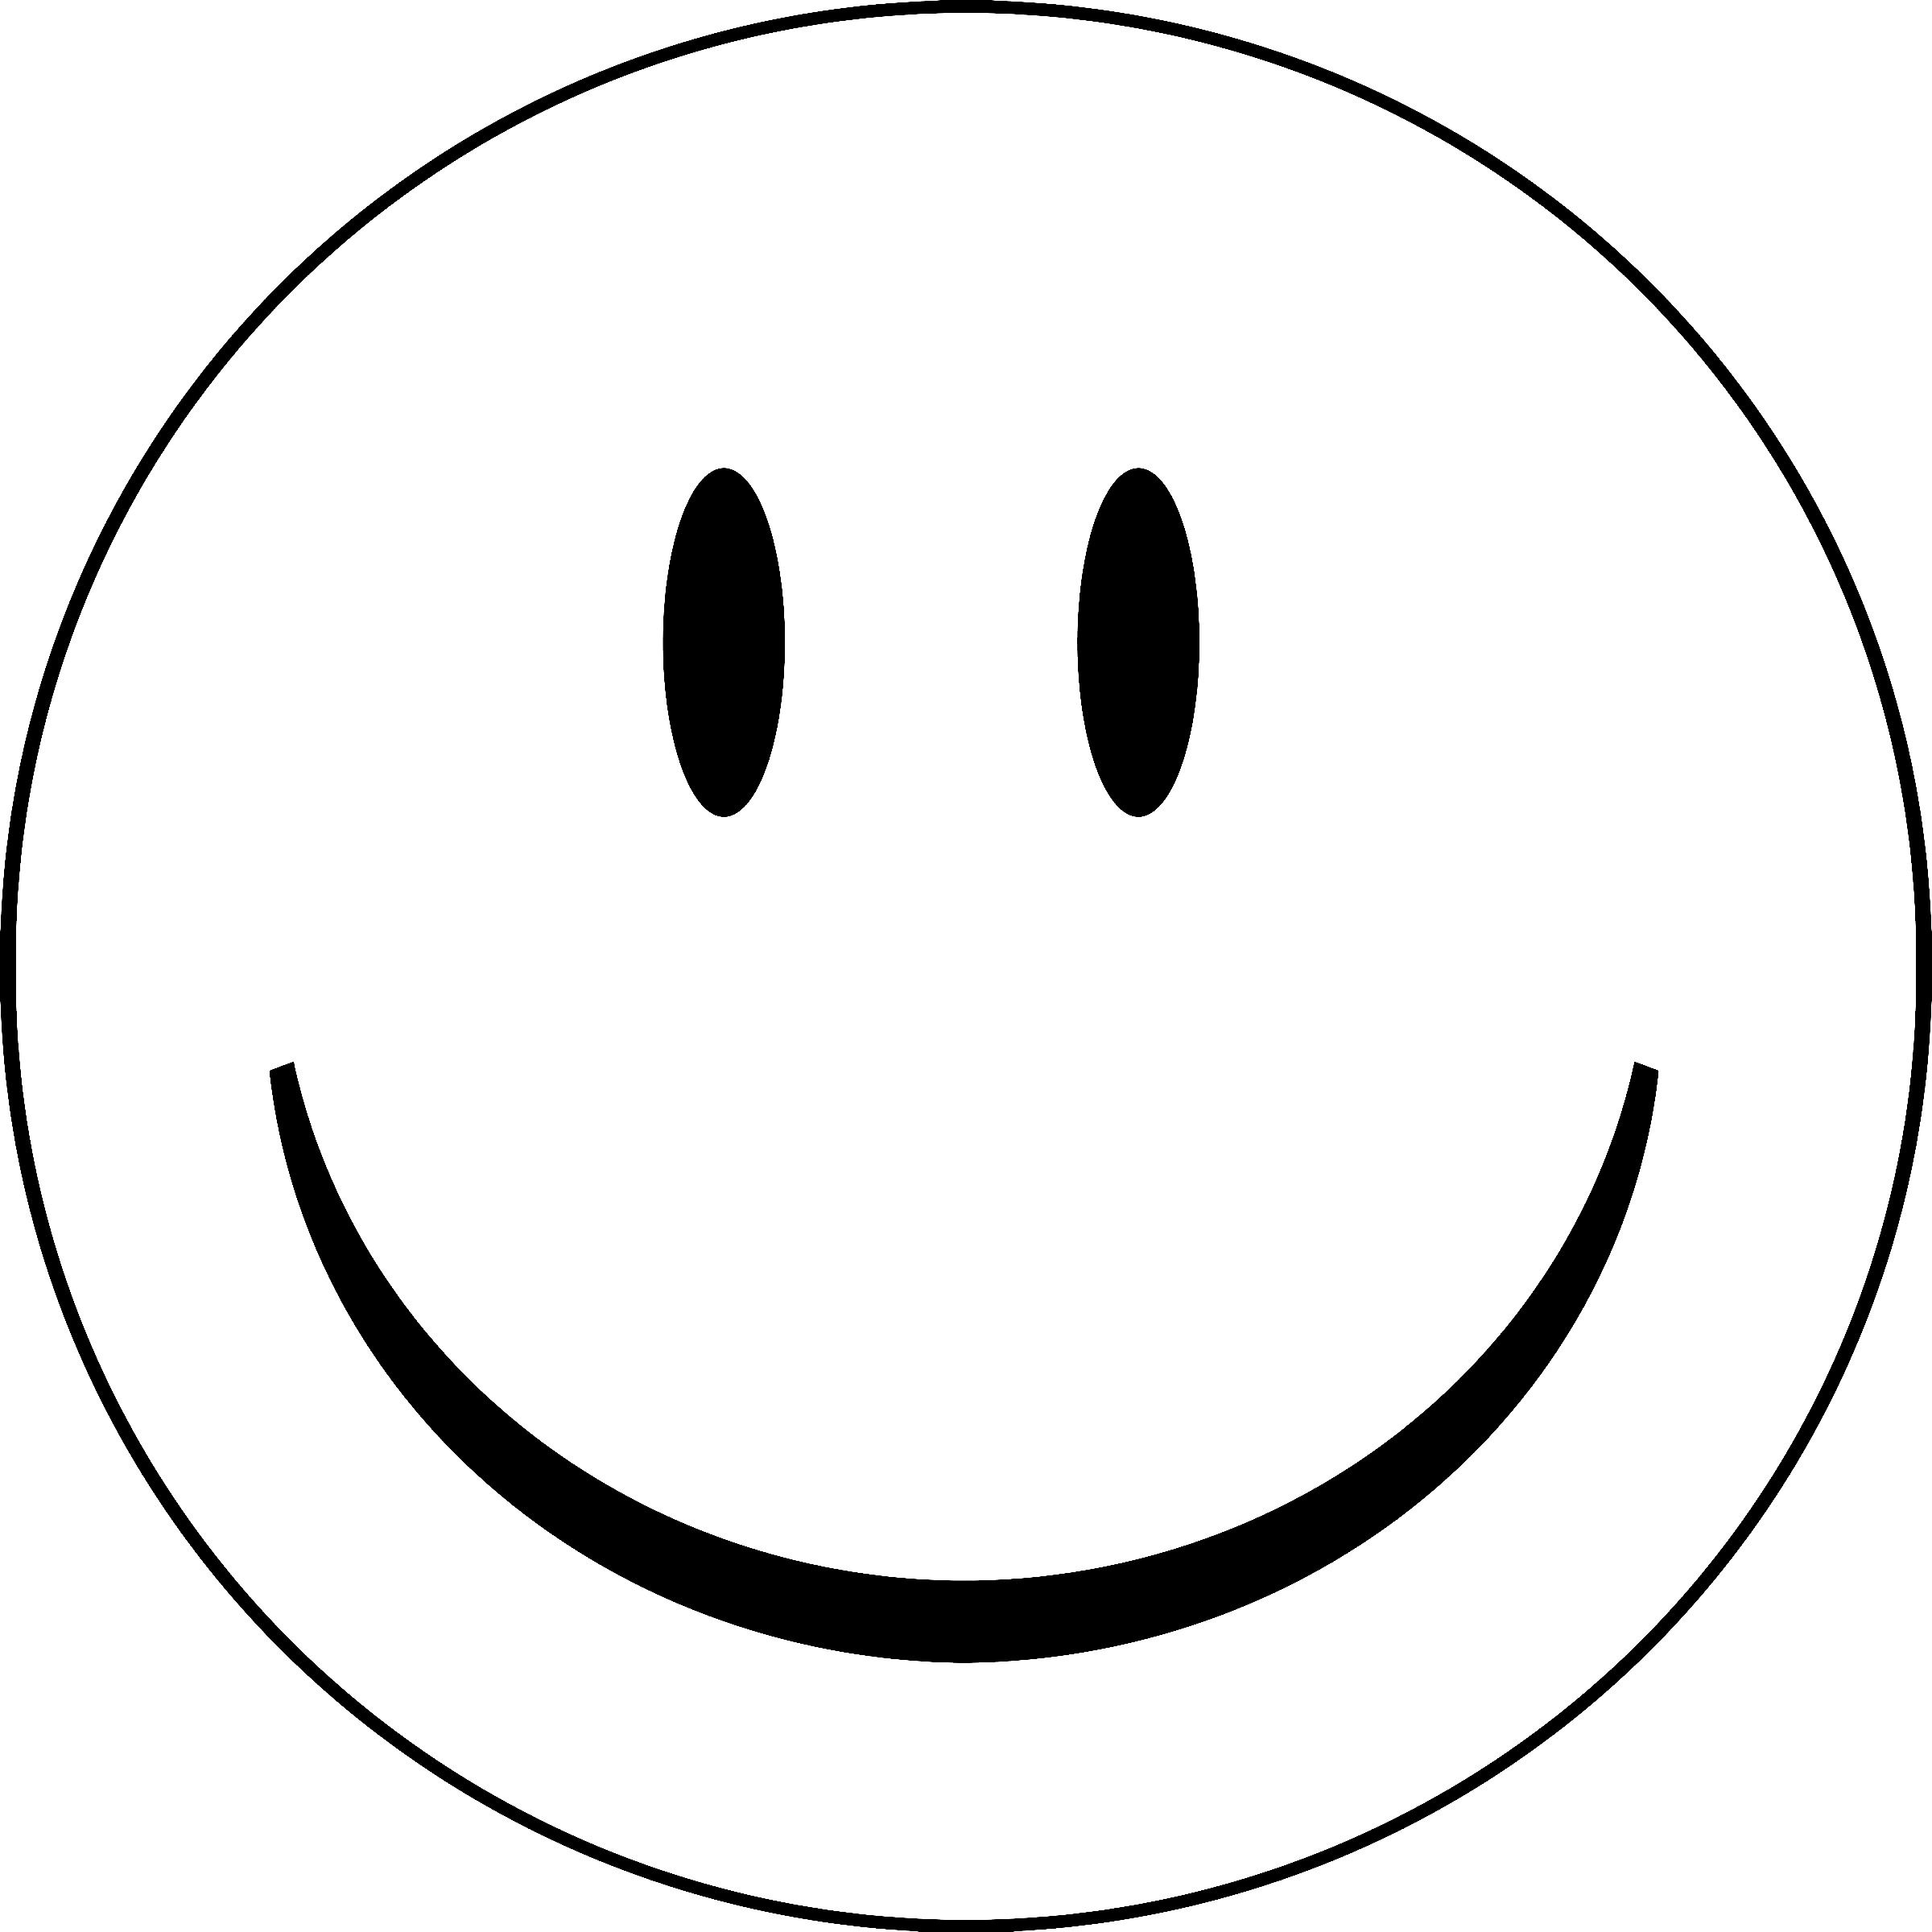 Happy Face Coloring Page